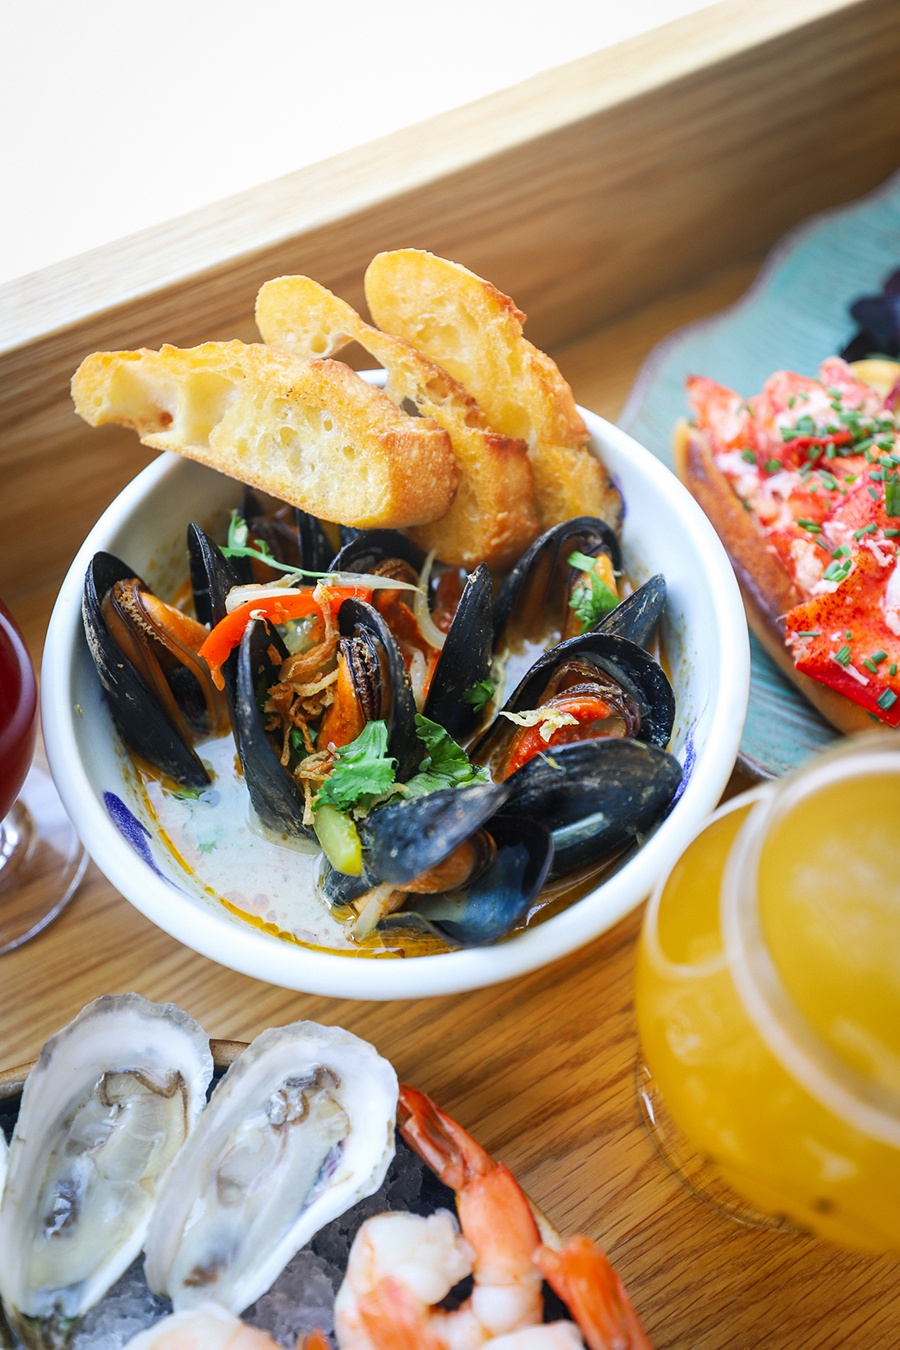 A bowl of mussels in broth, accompanied by bread, sits on a counter with other seafood dishes and glasses of beer.